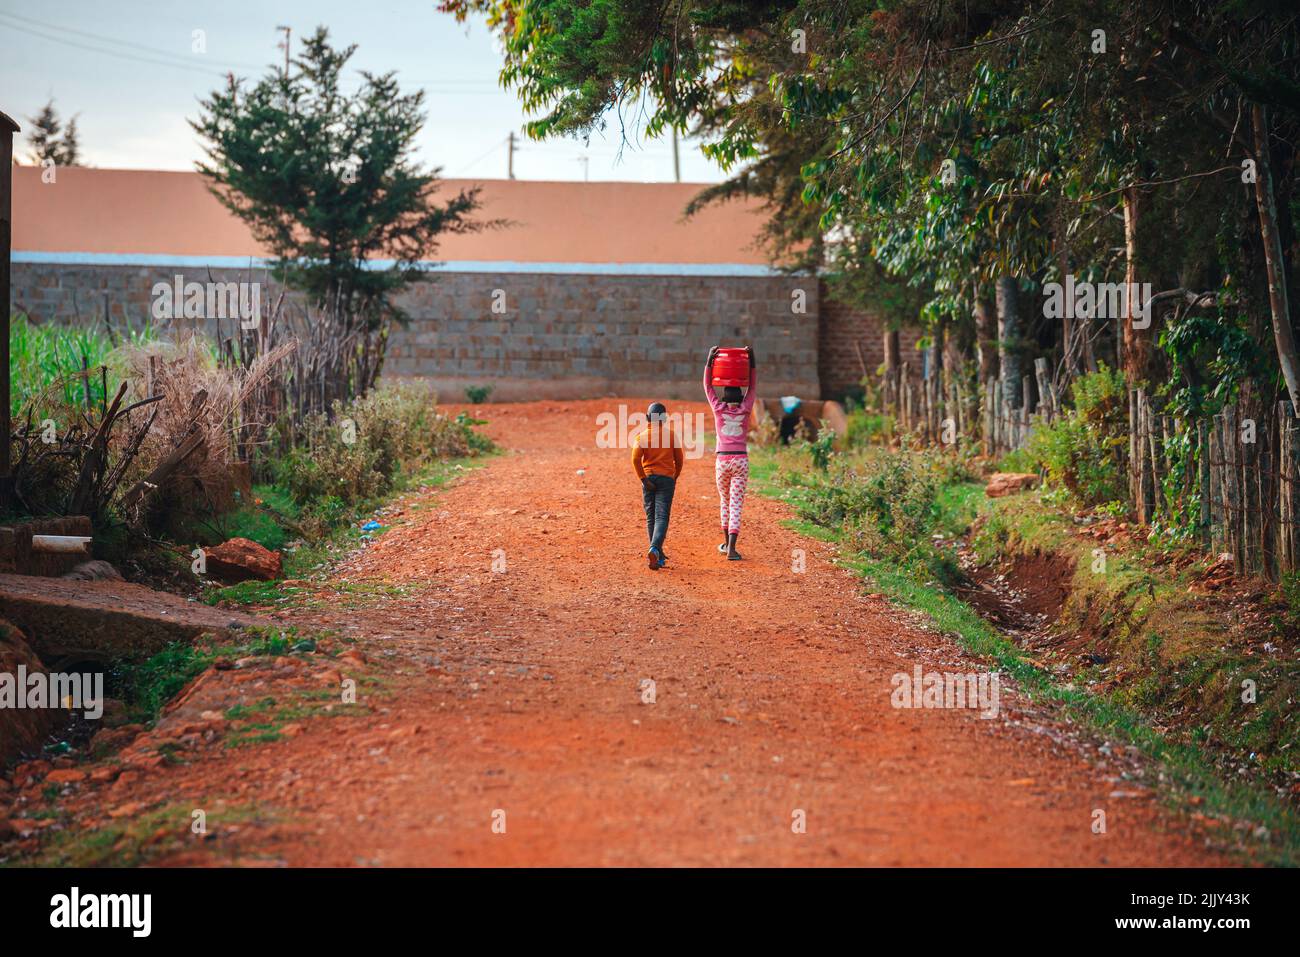 The hard work and life of children in Africa. two small children walking on a road in Kenya. A challenging childhood for young people in Africa Stock Photo